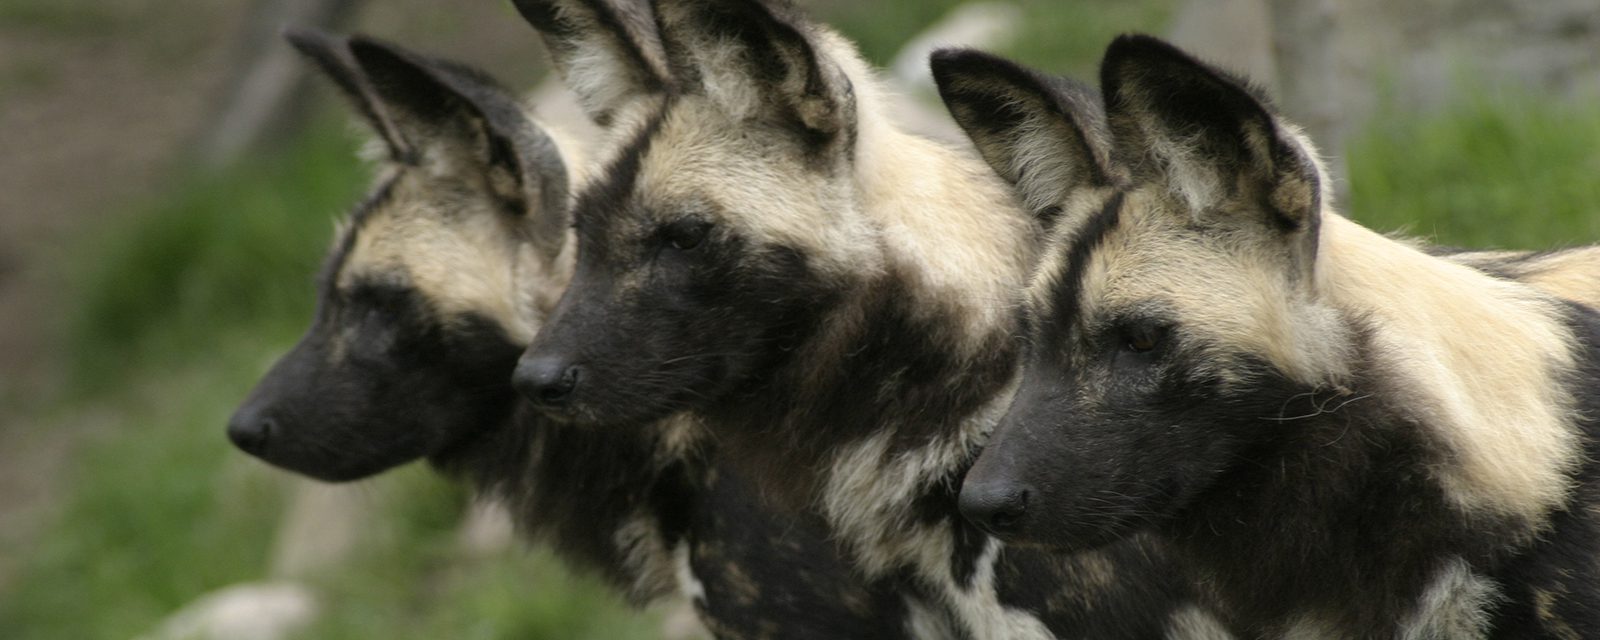 African painted dog in exhibit